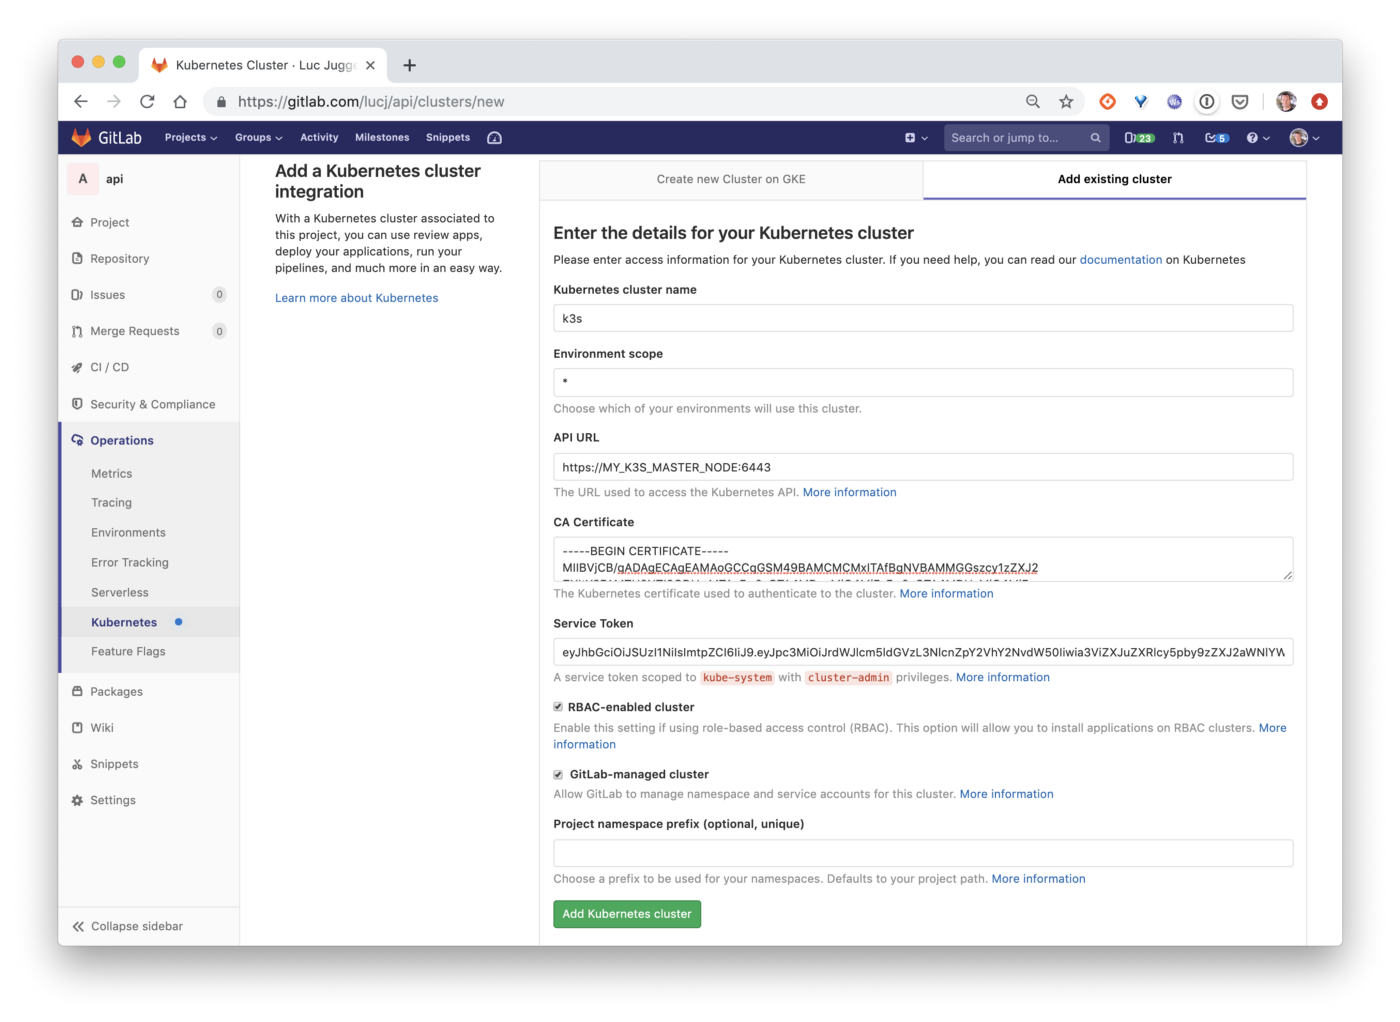 content/wechat/articles/2020/05/2020-05-06-using-a-k3s-kubernetes-cluster-for-your-gitlab-project/add-existing-cluster-with-all-information.png